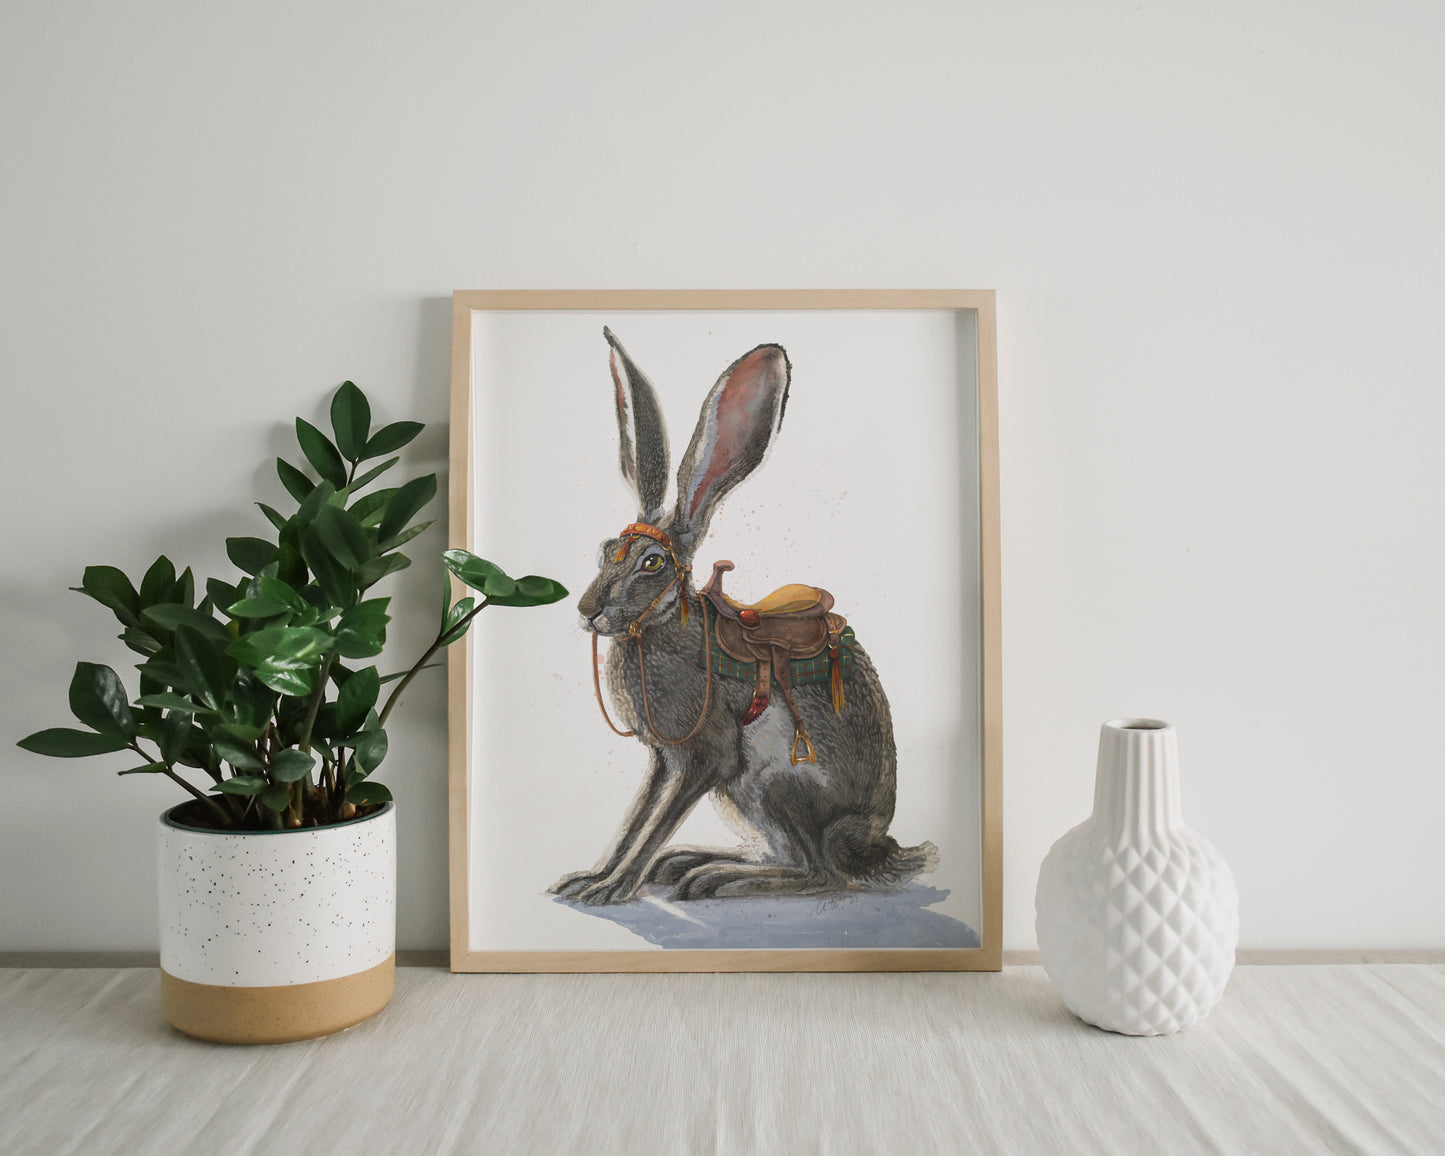 "Gallop of the Hare" by Catherine Hébert - Watercolour Hare Giclee Art Print